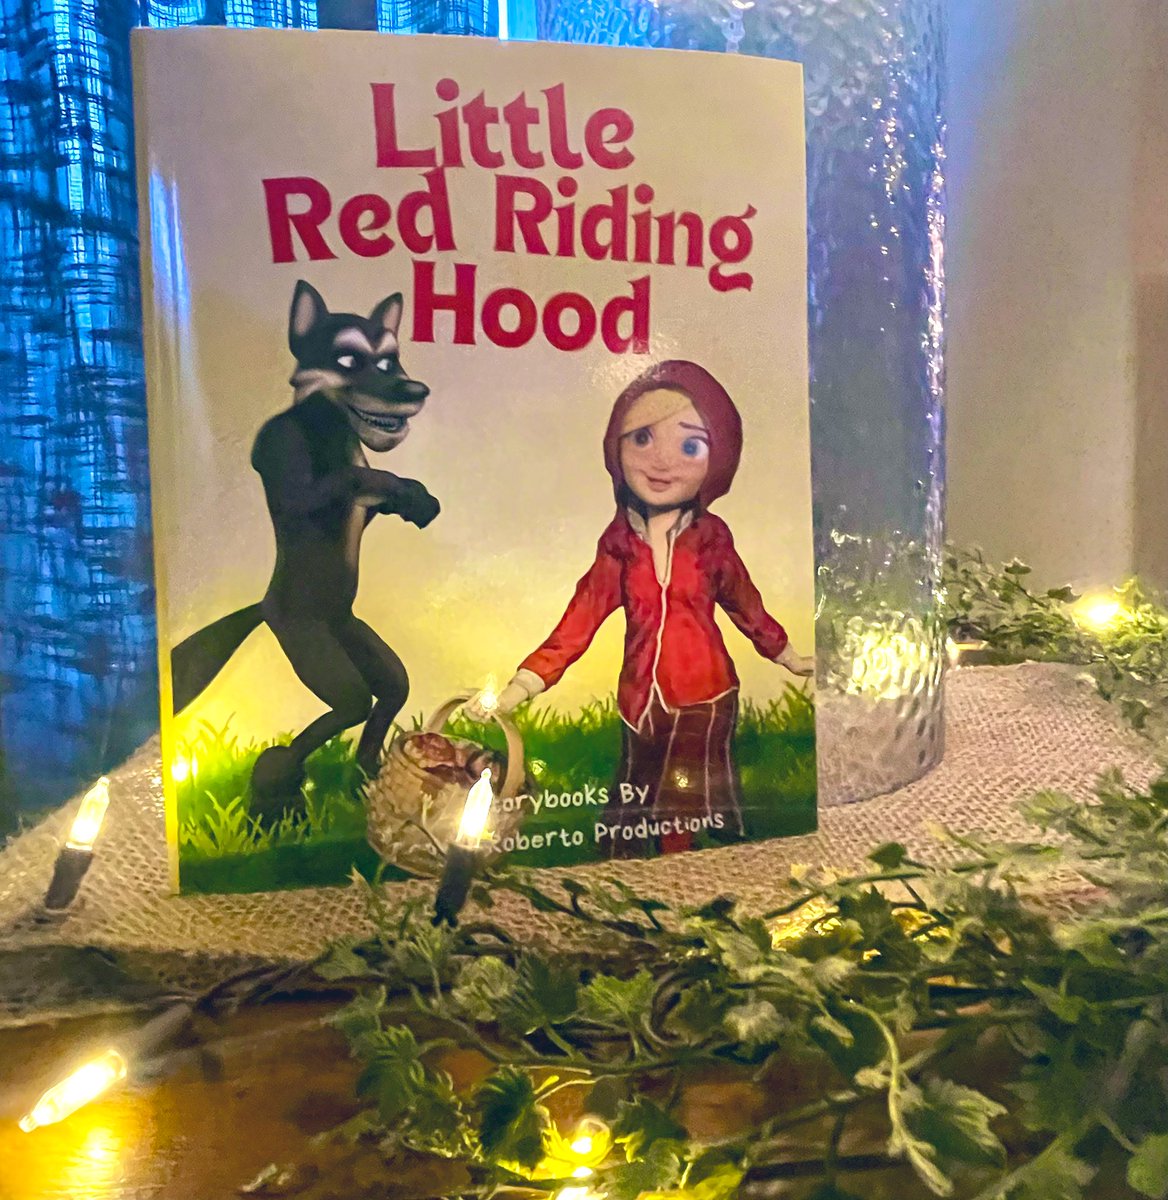 Delightfully illustrated Little Red Riding Hood book - a charming gift for kids and the young at heart. Get yours now!a.co/d/9aX5Mlg #childrensbooks #littleredridinghood #fairytales #storybooks